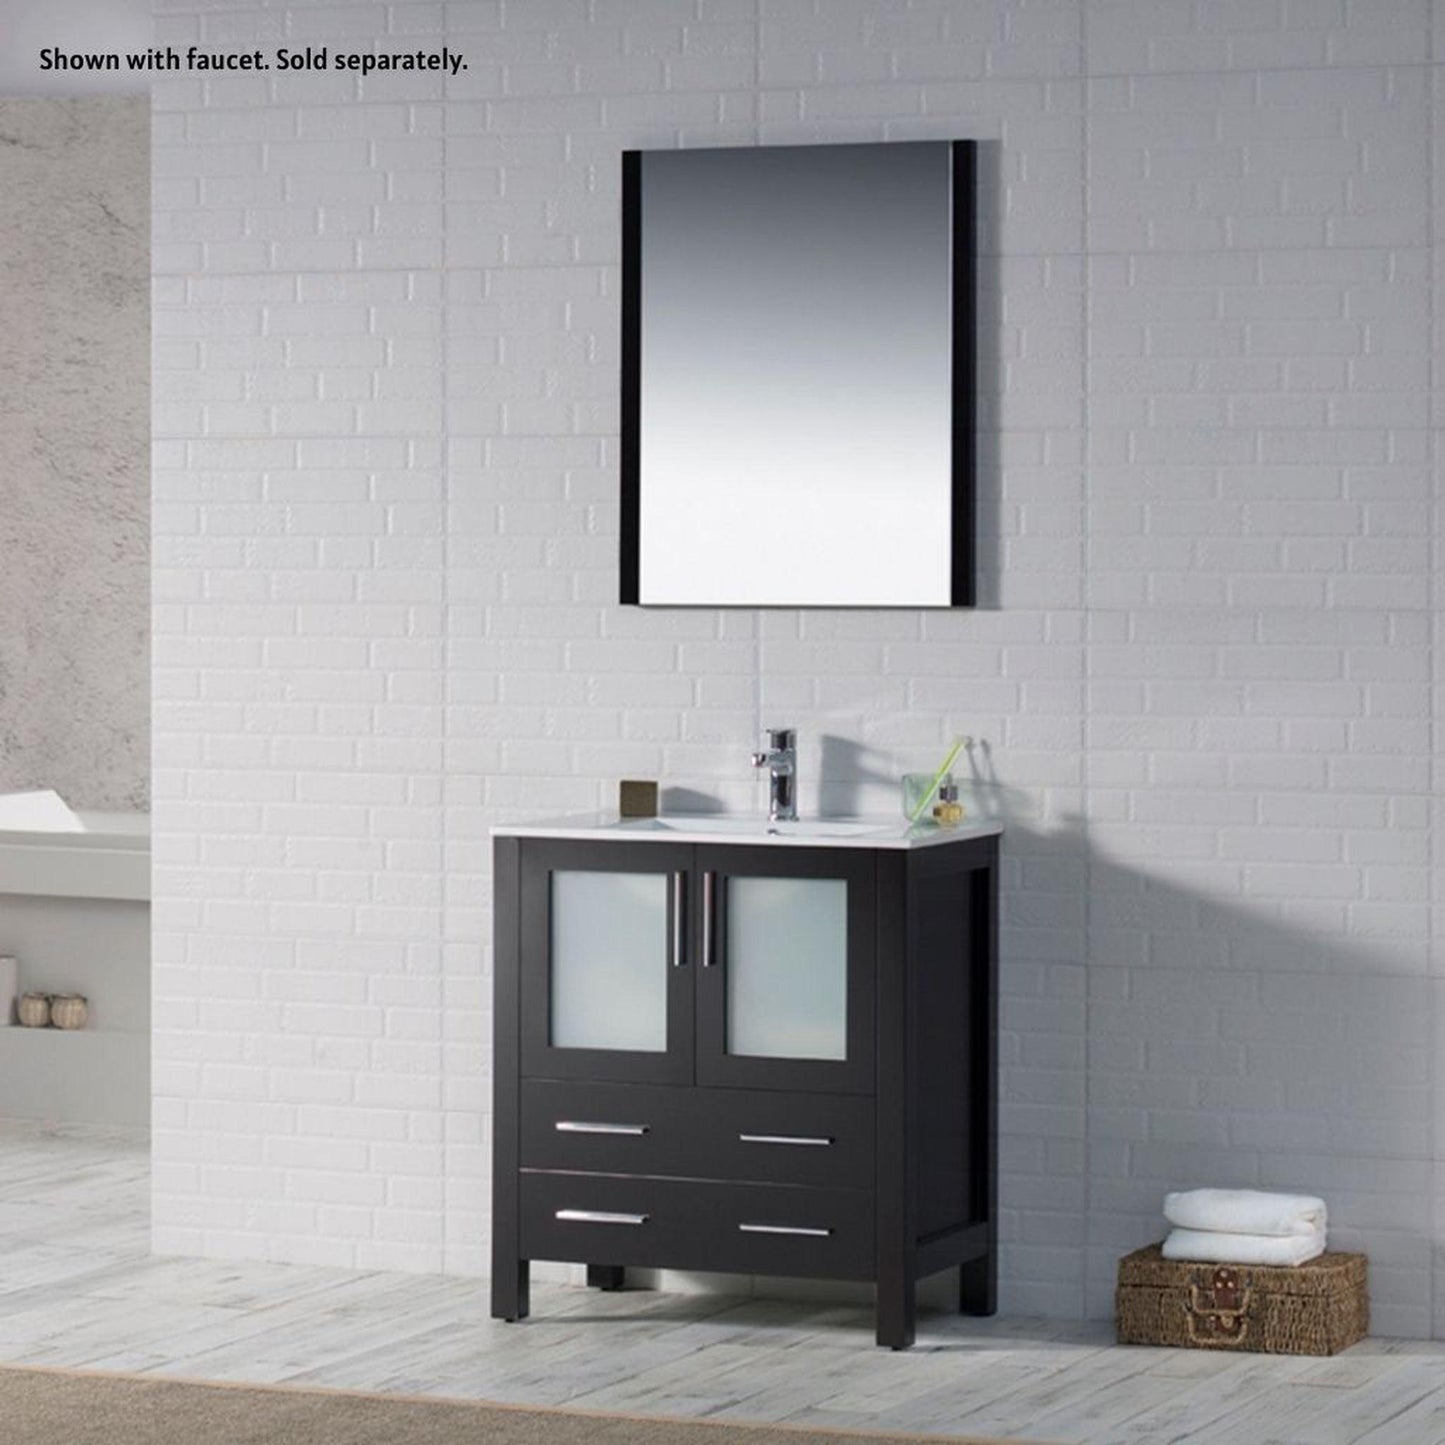 Blossom Sydney 30" Espresso Freestanding Vanity Set With Integrated Single Sink Ceramic Top and Mirror